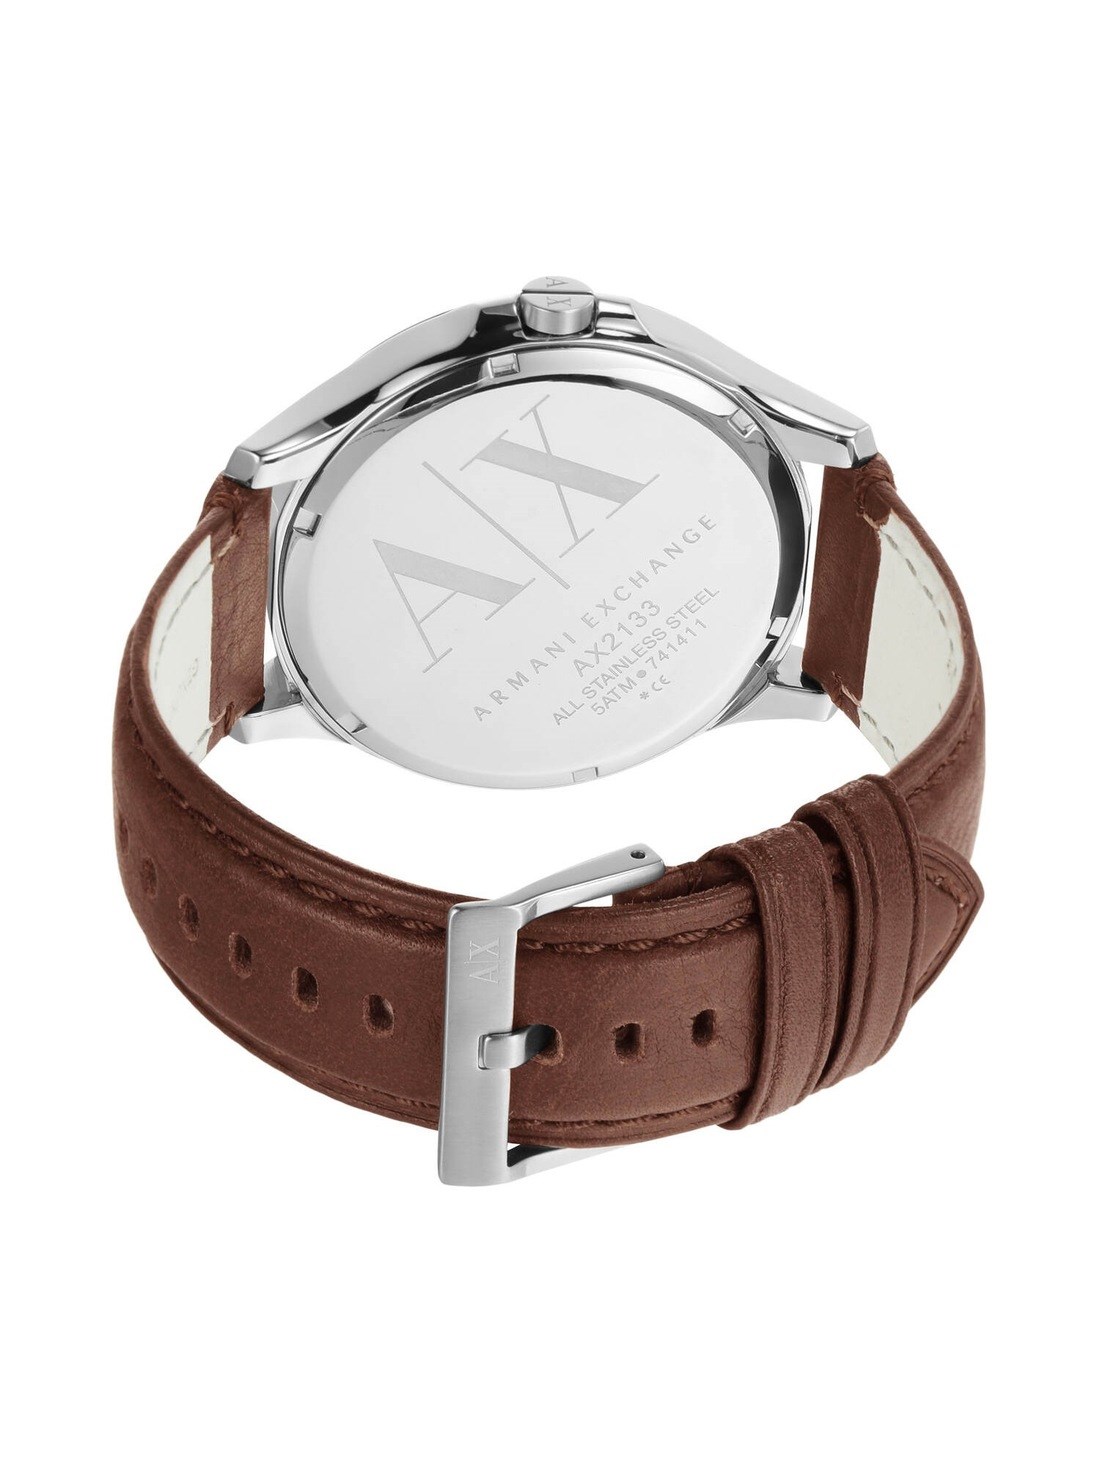 Armani Exchange Navy Dial Brown Leather Men's Watch AX2133 723763212410